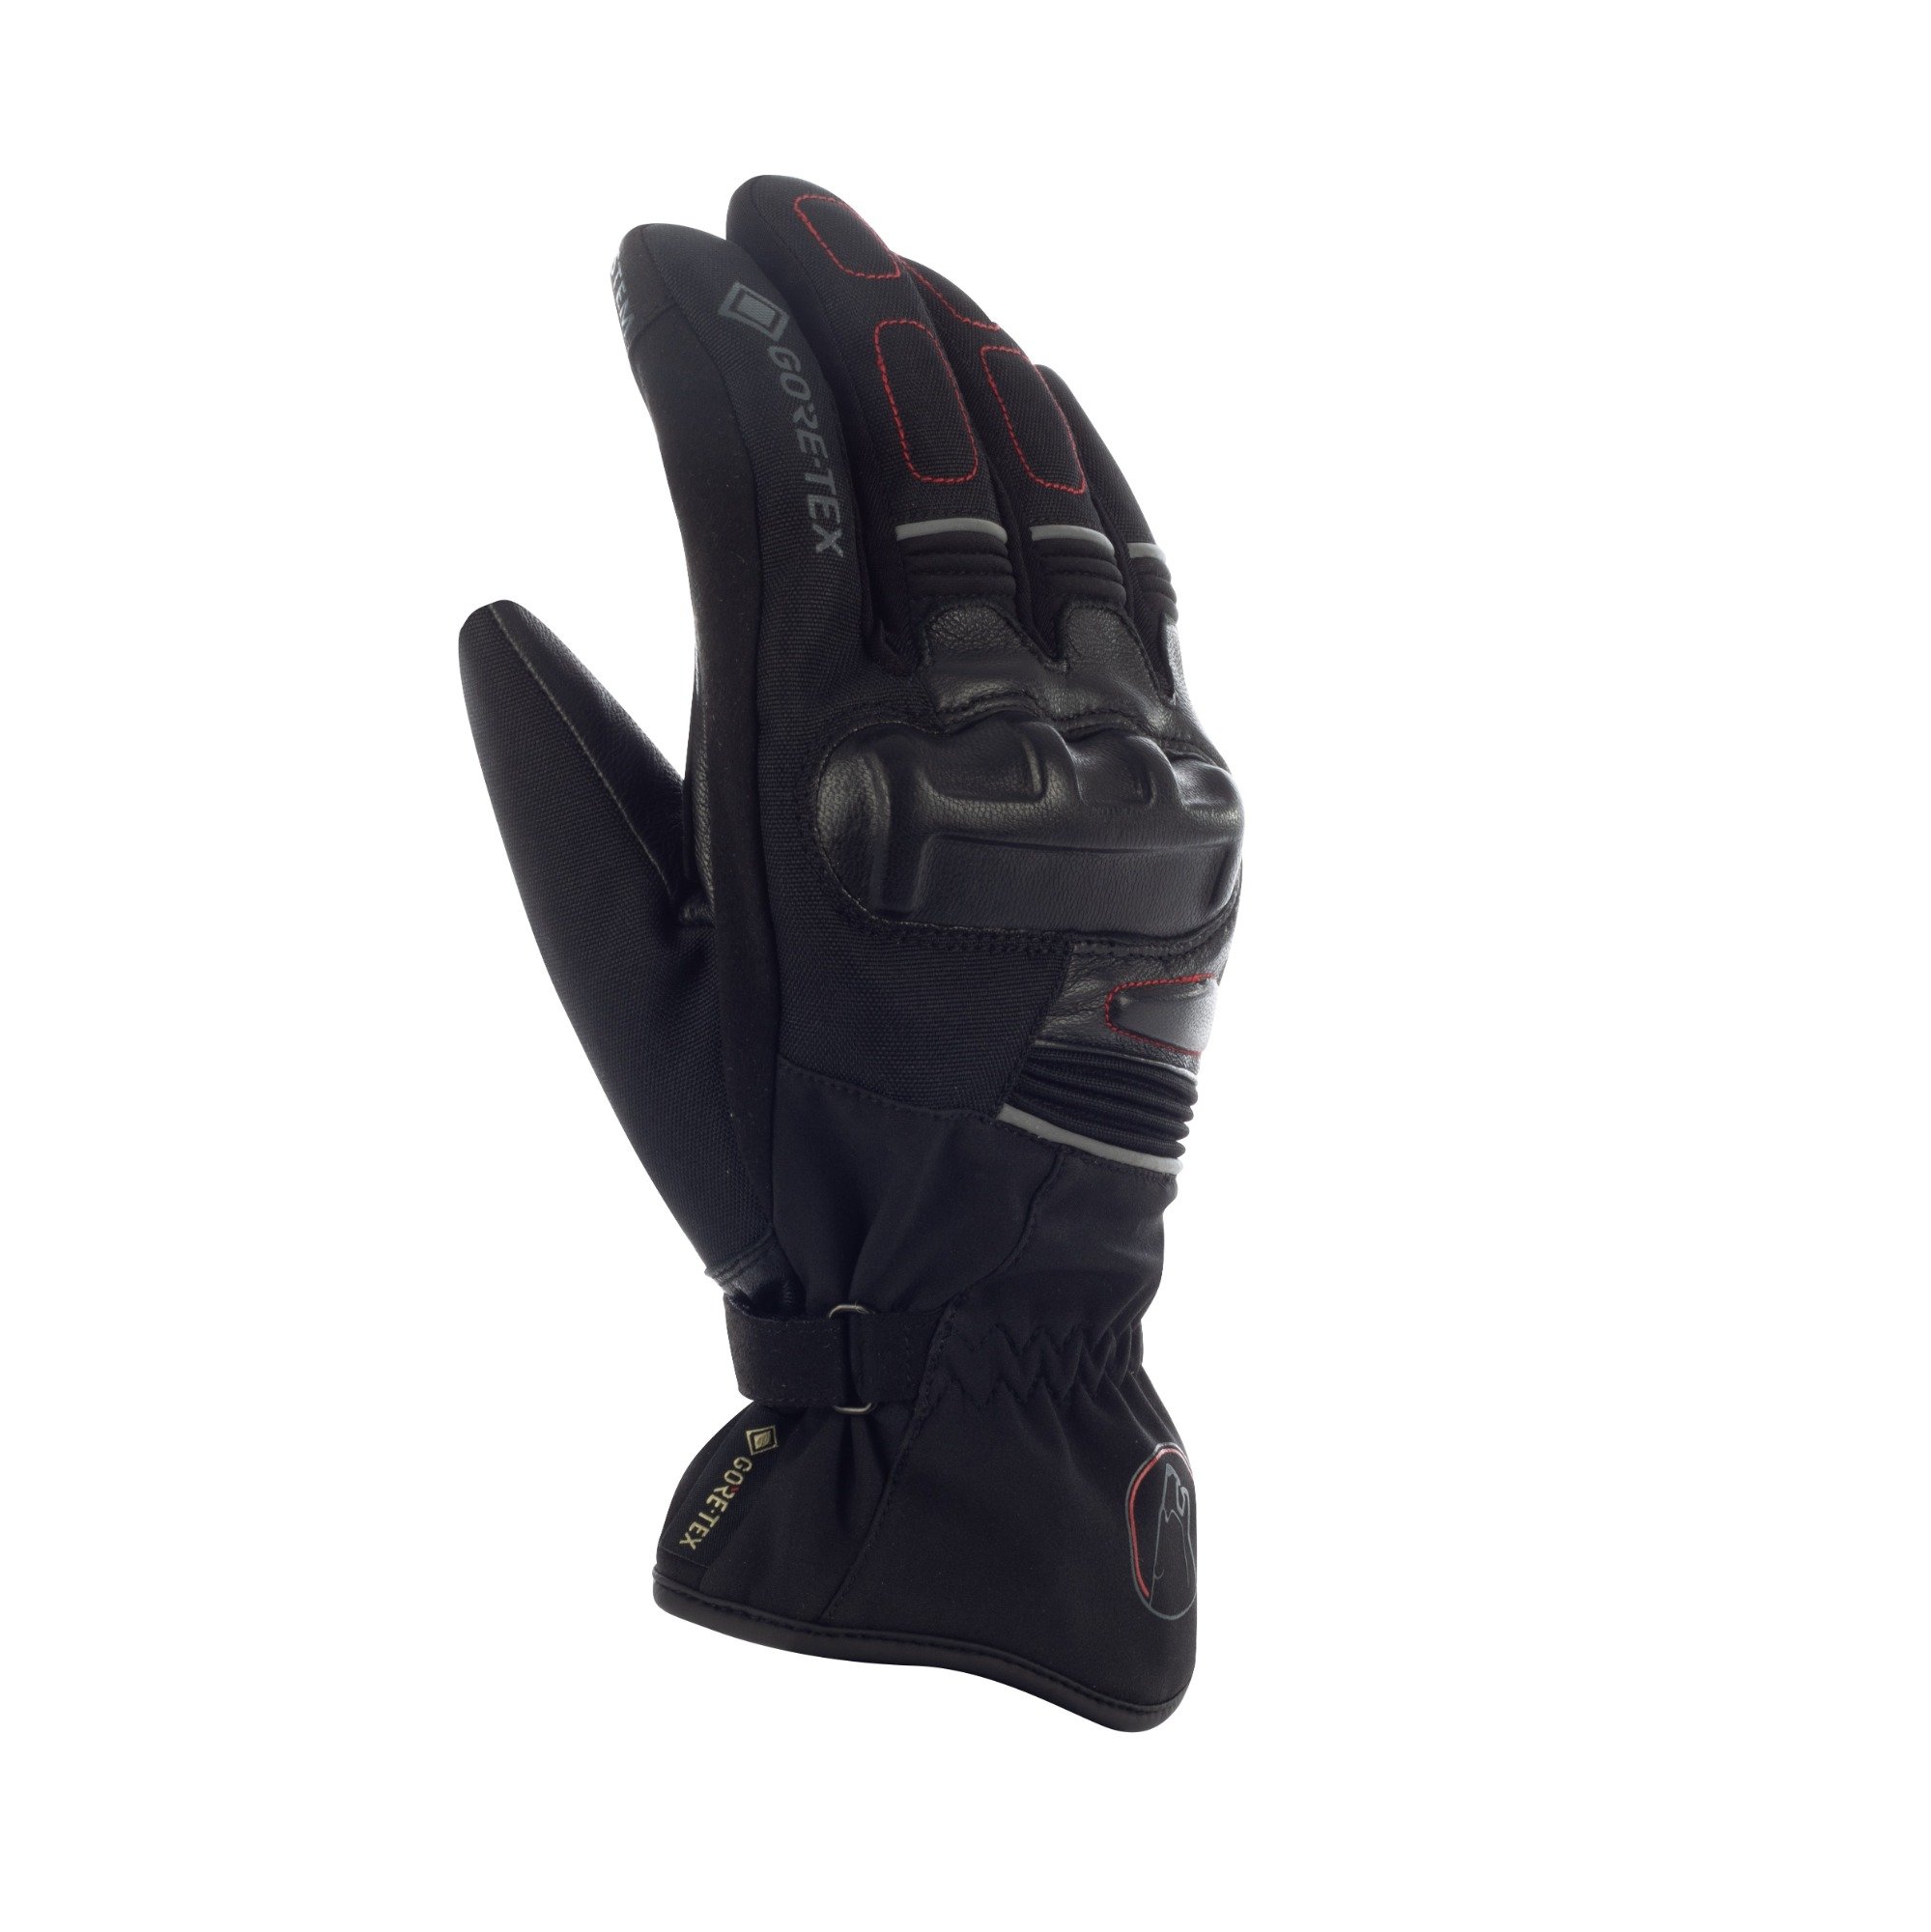 Image of Bering Punch GTX Gloves Black Size T8 ID 3660815172100